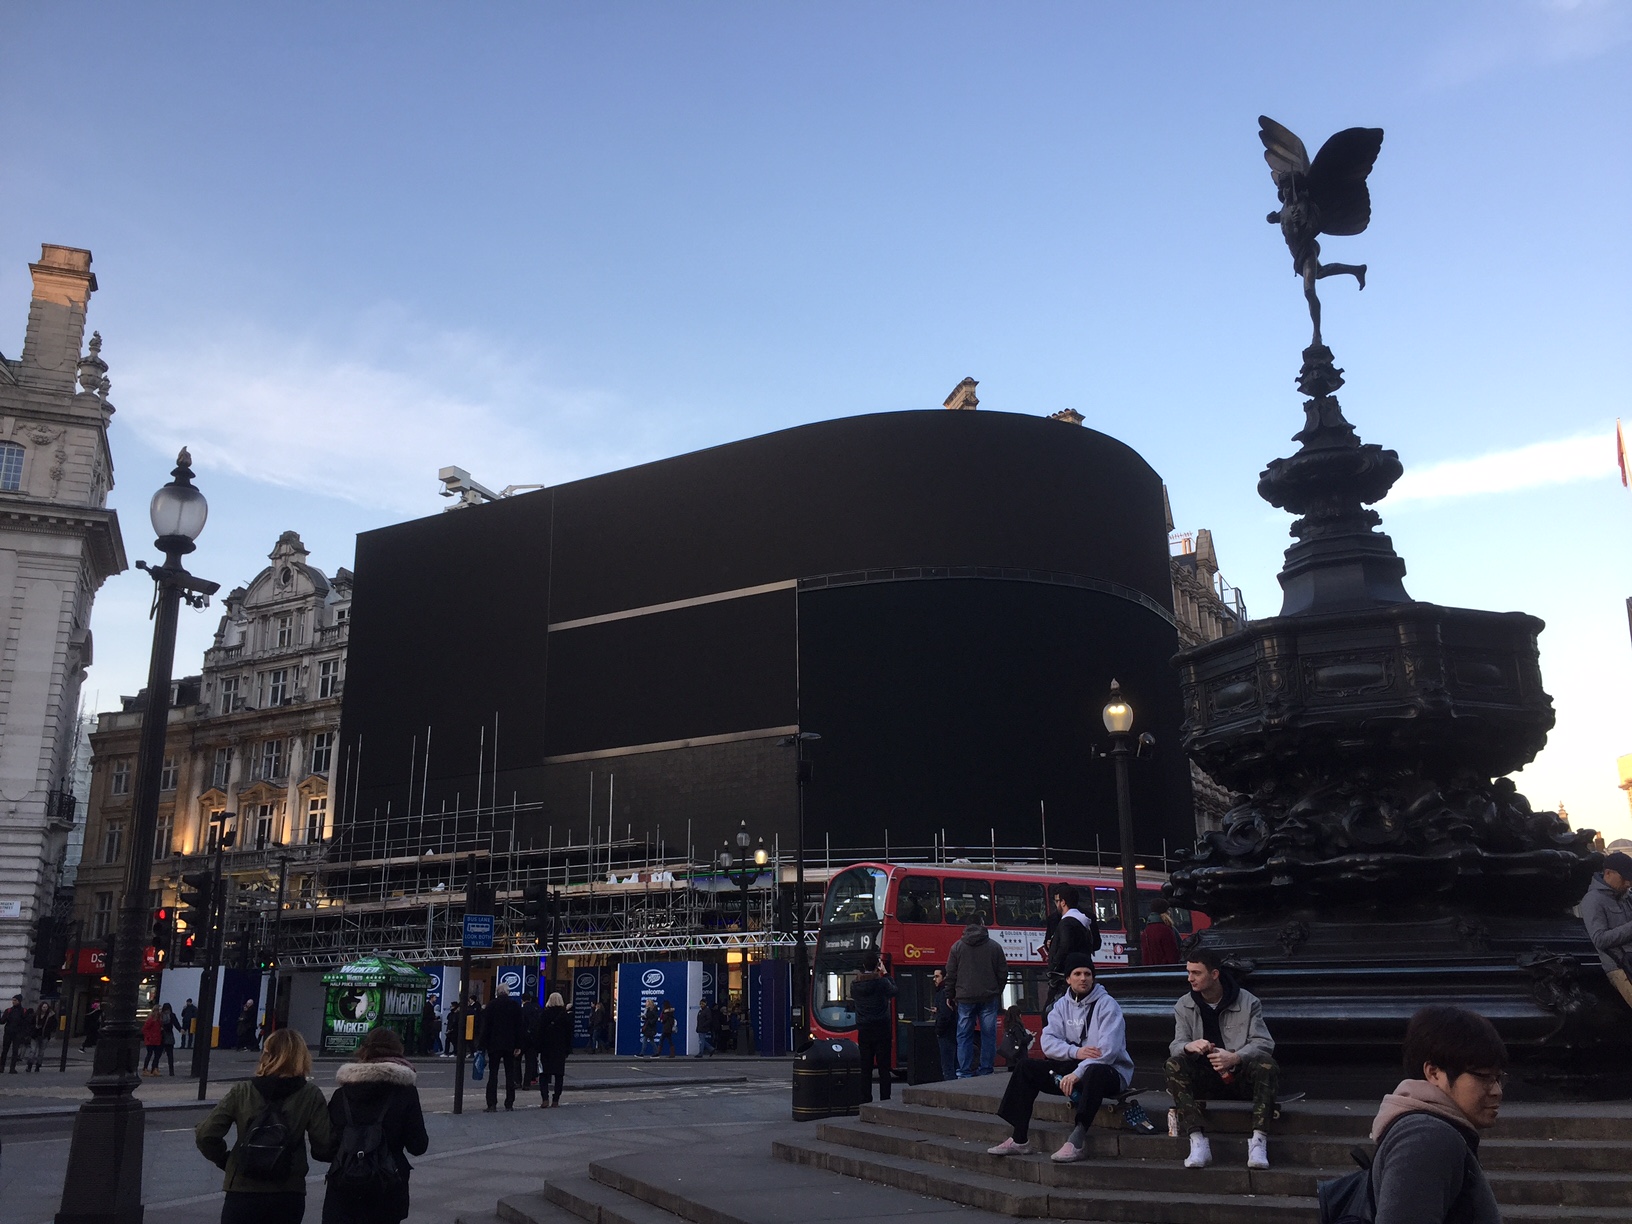 Piccadilly Circus: No Lights.